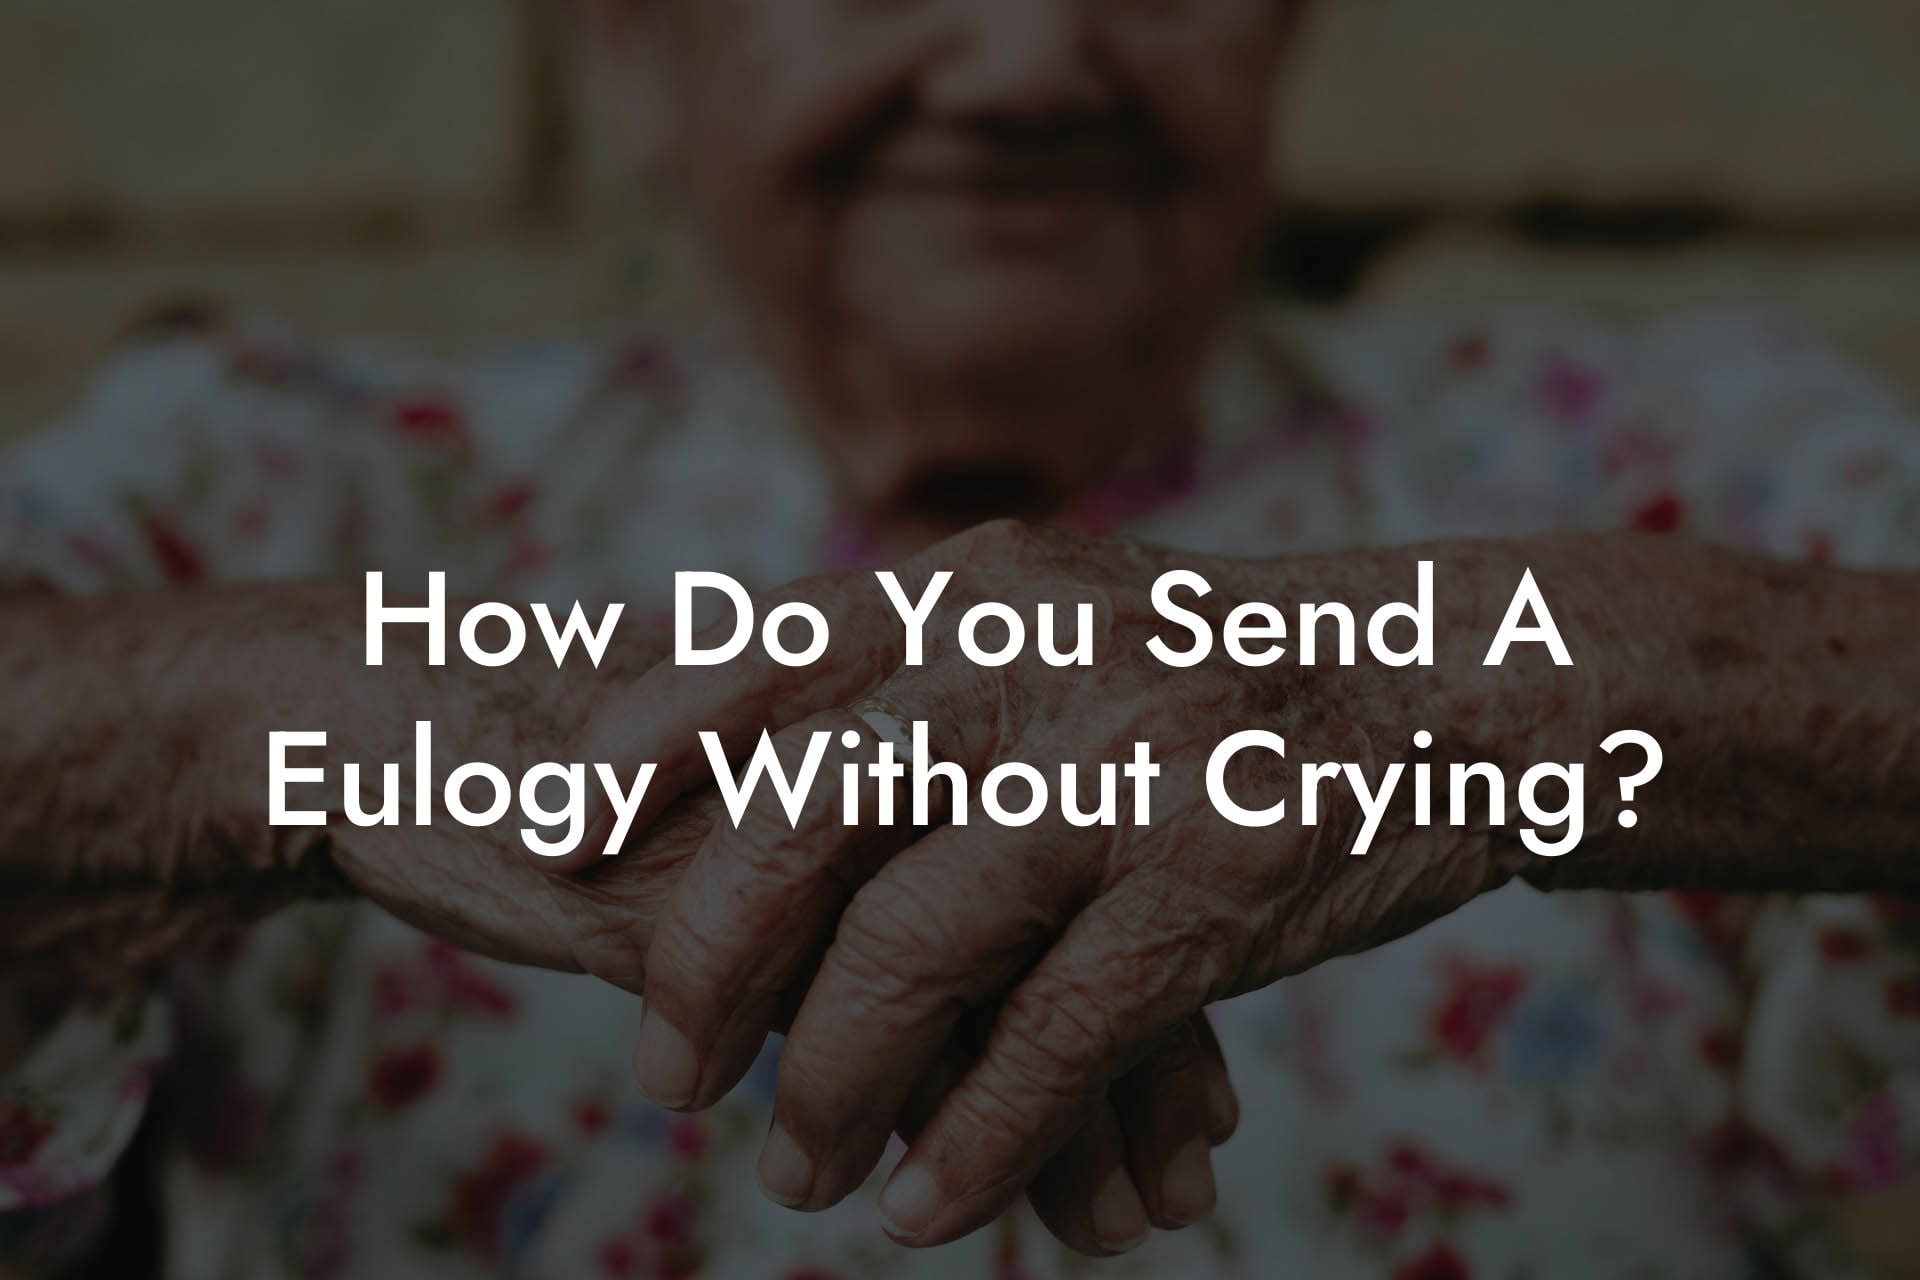 How Do You Send A Eulogy Without Crying?